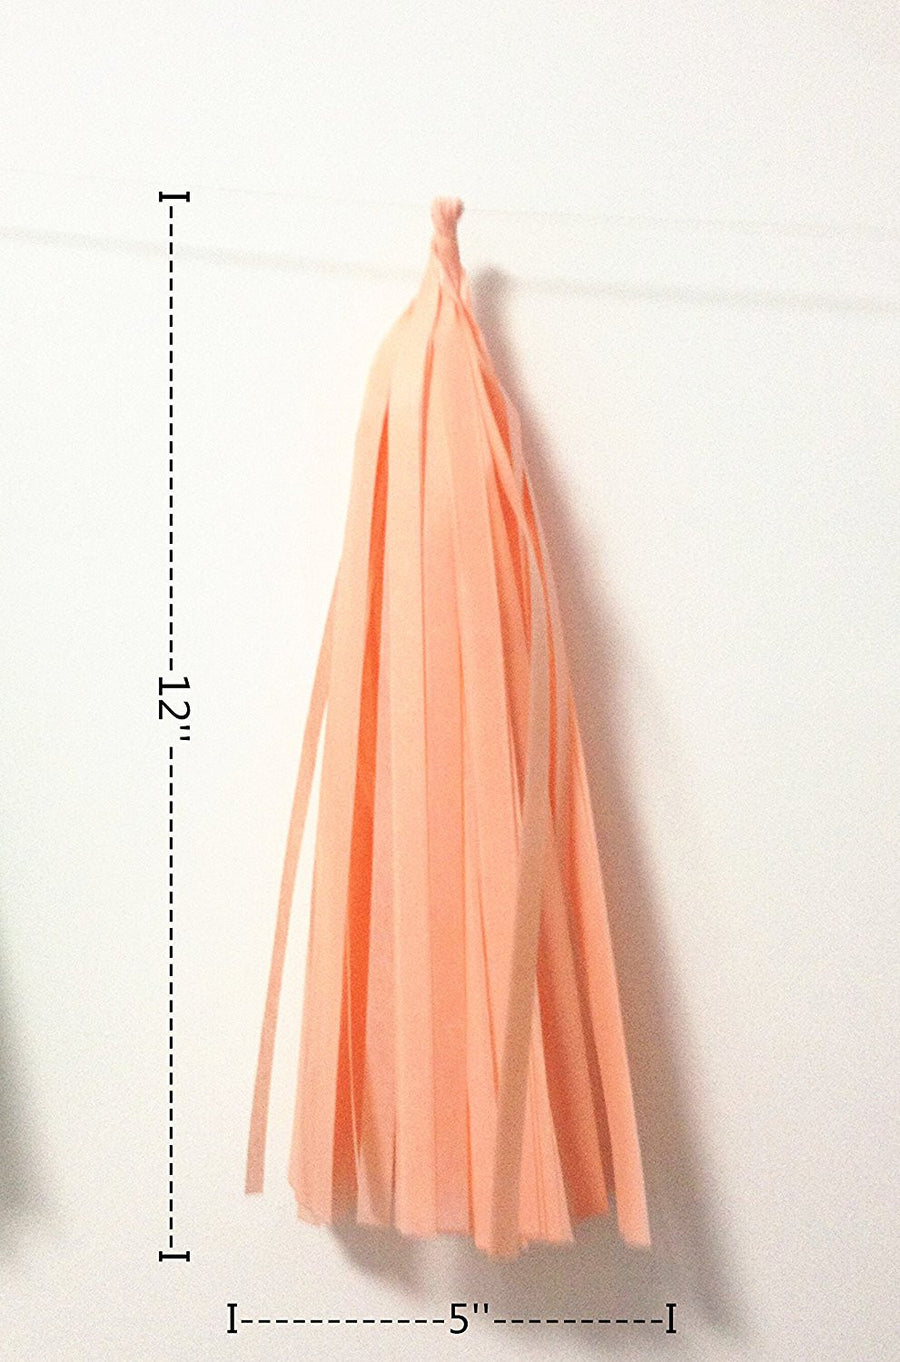 16 X Originals Group Mint Pink Gold Apricot Tissue Paper Tassels for Party Wedding Gold Garland Bunting Pom Pom - Originalsgroup